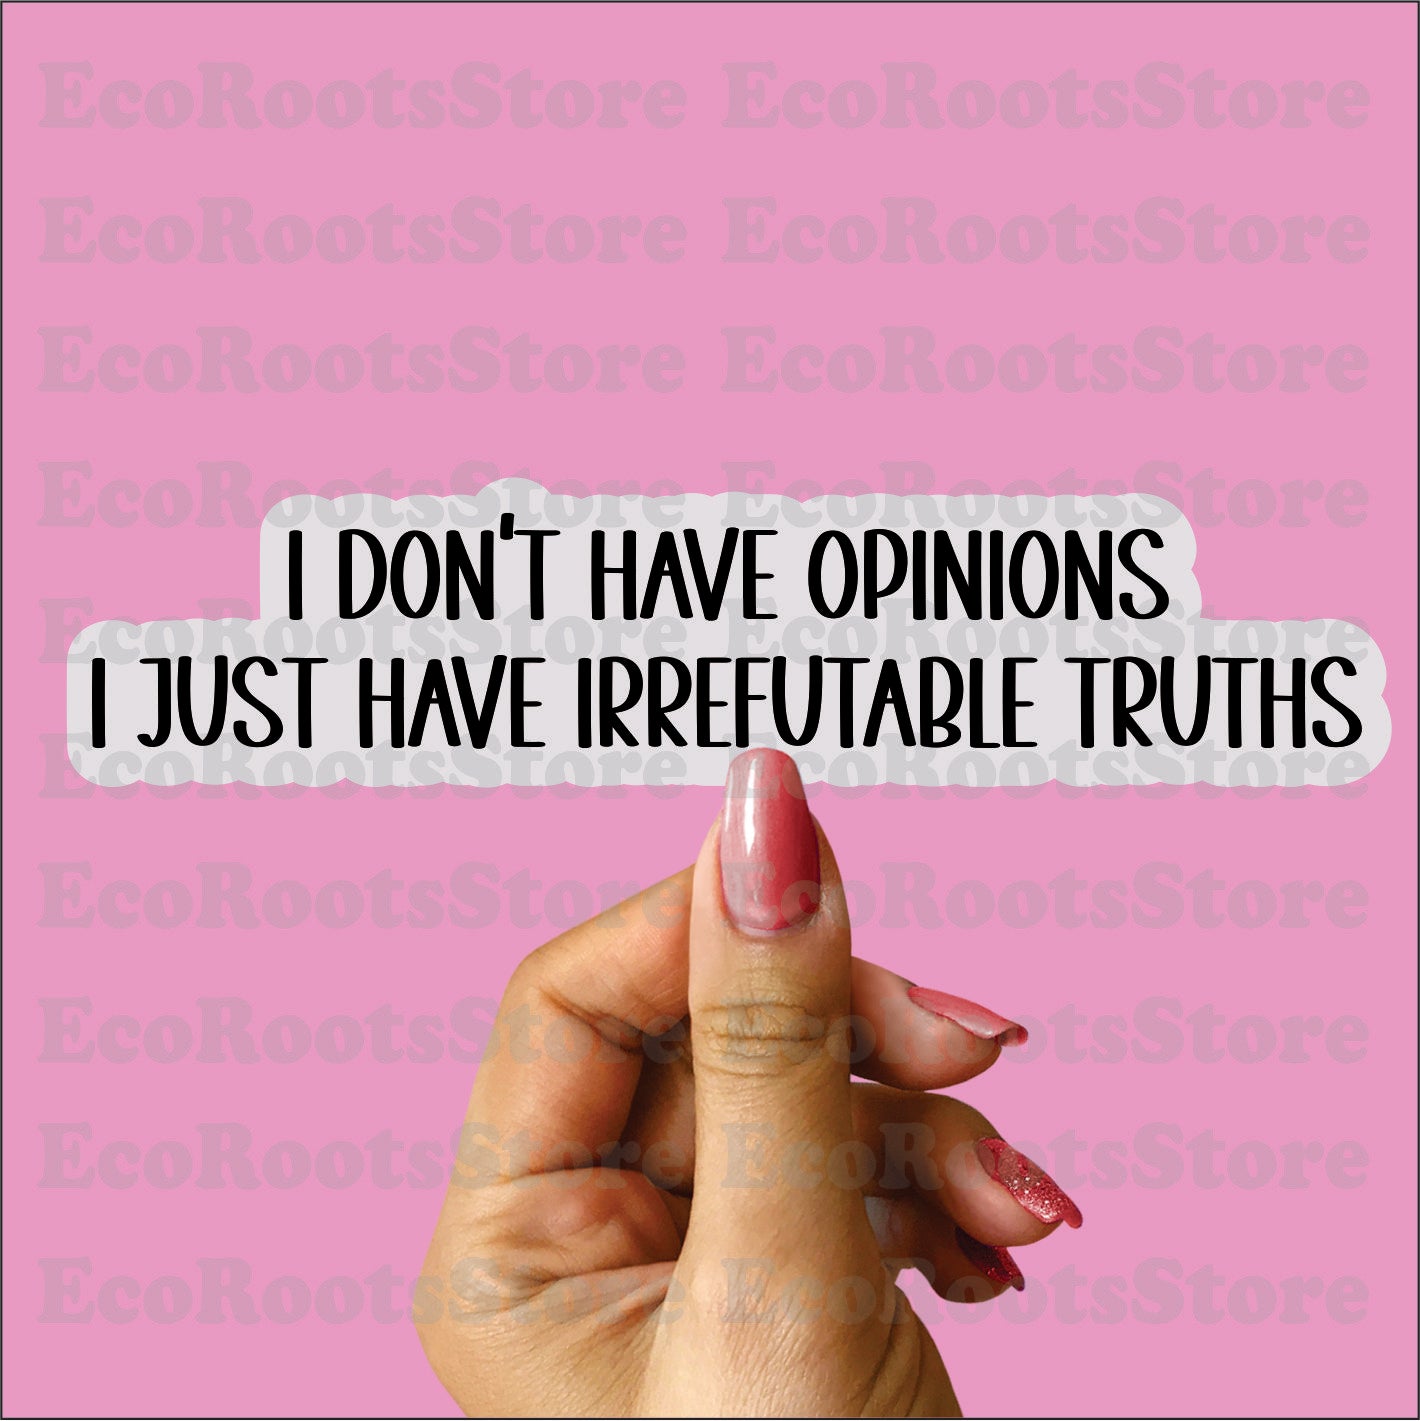 I DON’T HAVE OPINIONS, I JUST HAVE IRREFUTABLE TRUTHS Vinyl Sticker